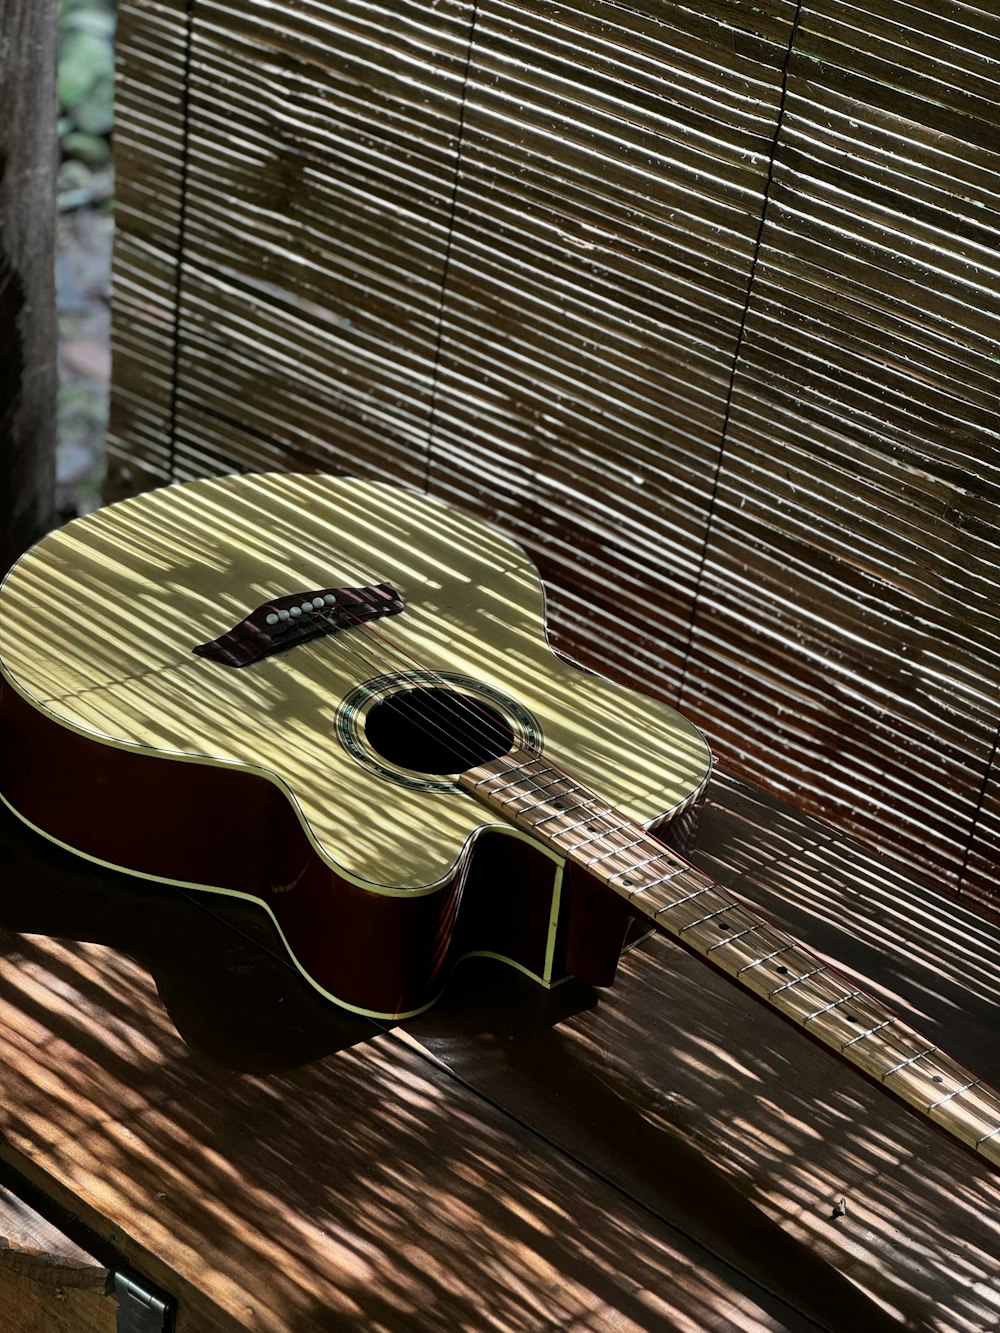 an acoustic guitar sitting on a wooden bench